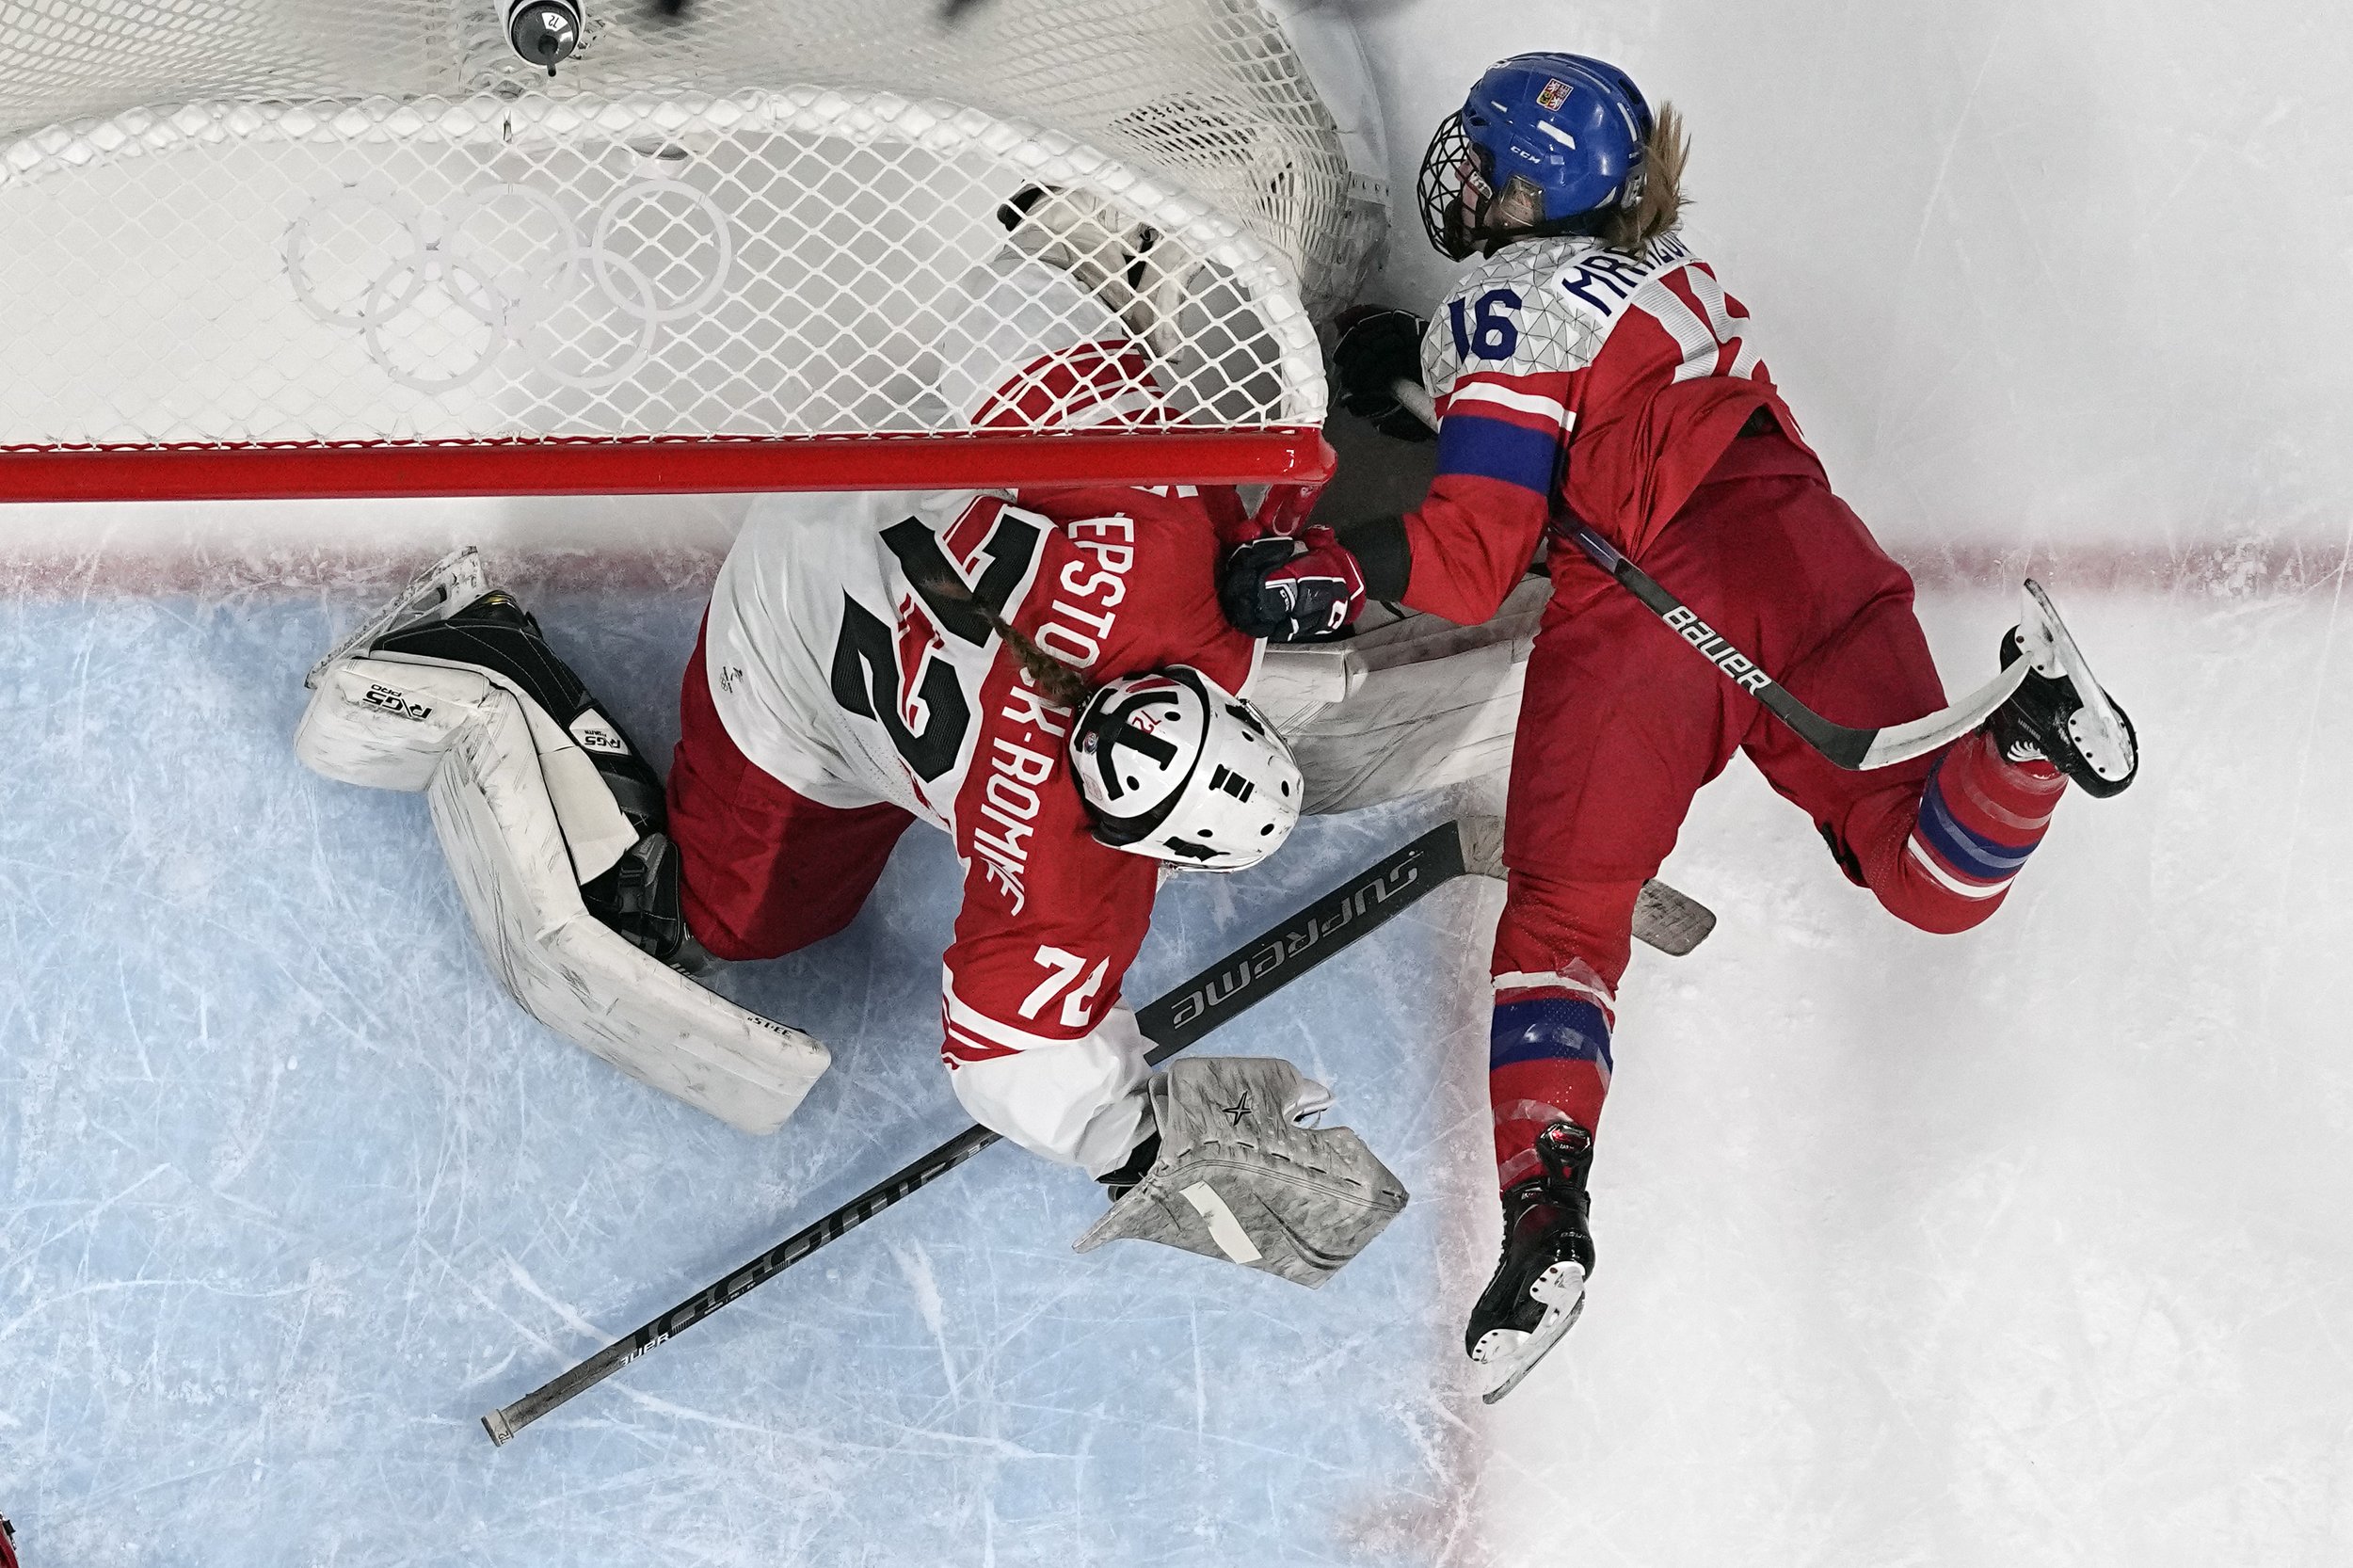  Czech Republic's Katerina Mrazova (16) falls against the net and Denmark goalkeeper Cassandra Repstock-Romme (72) during a preliminary round women's hockey game at the 2022 Winter Olympics, Monday, Feb. 7, 2022, in Beijing. (AP Photo/Petr David Jose